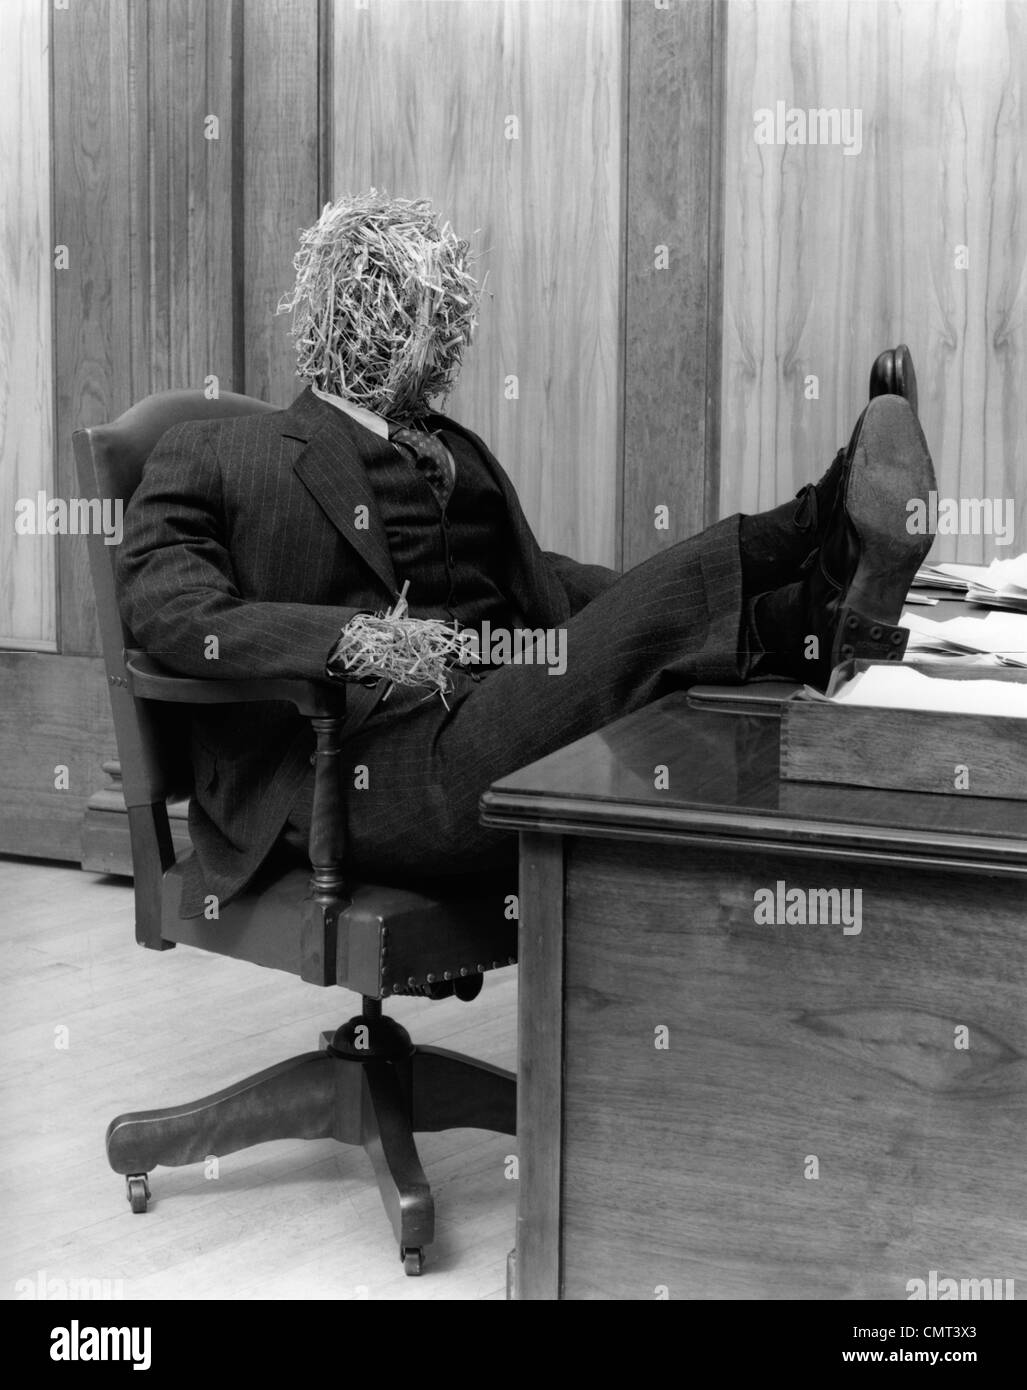 1930s STRAW MAN IN SUIT & TIE SEATED IN EXECUTIVE CHAIR WITH FEET PROPPED UP ON OFFICE DESK Stock Photo